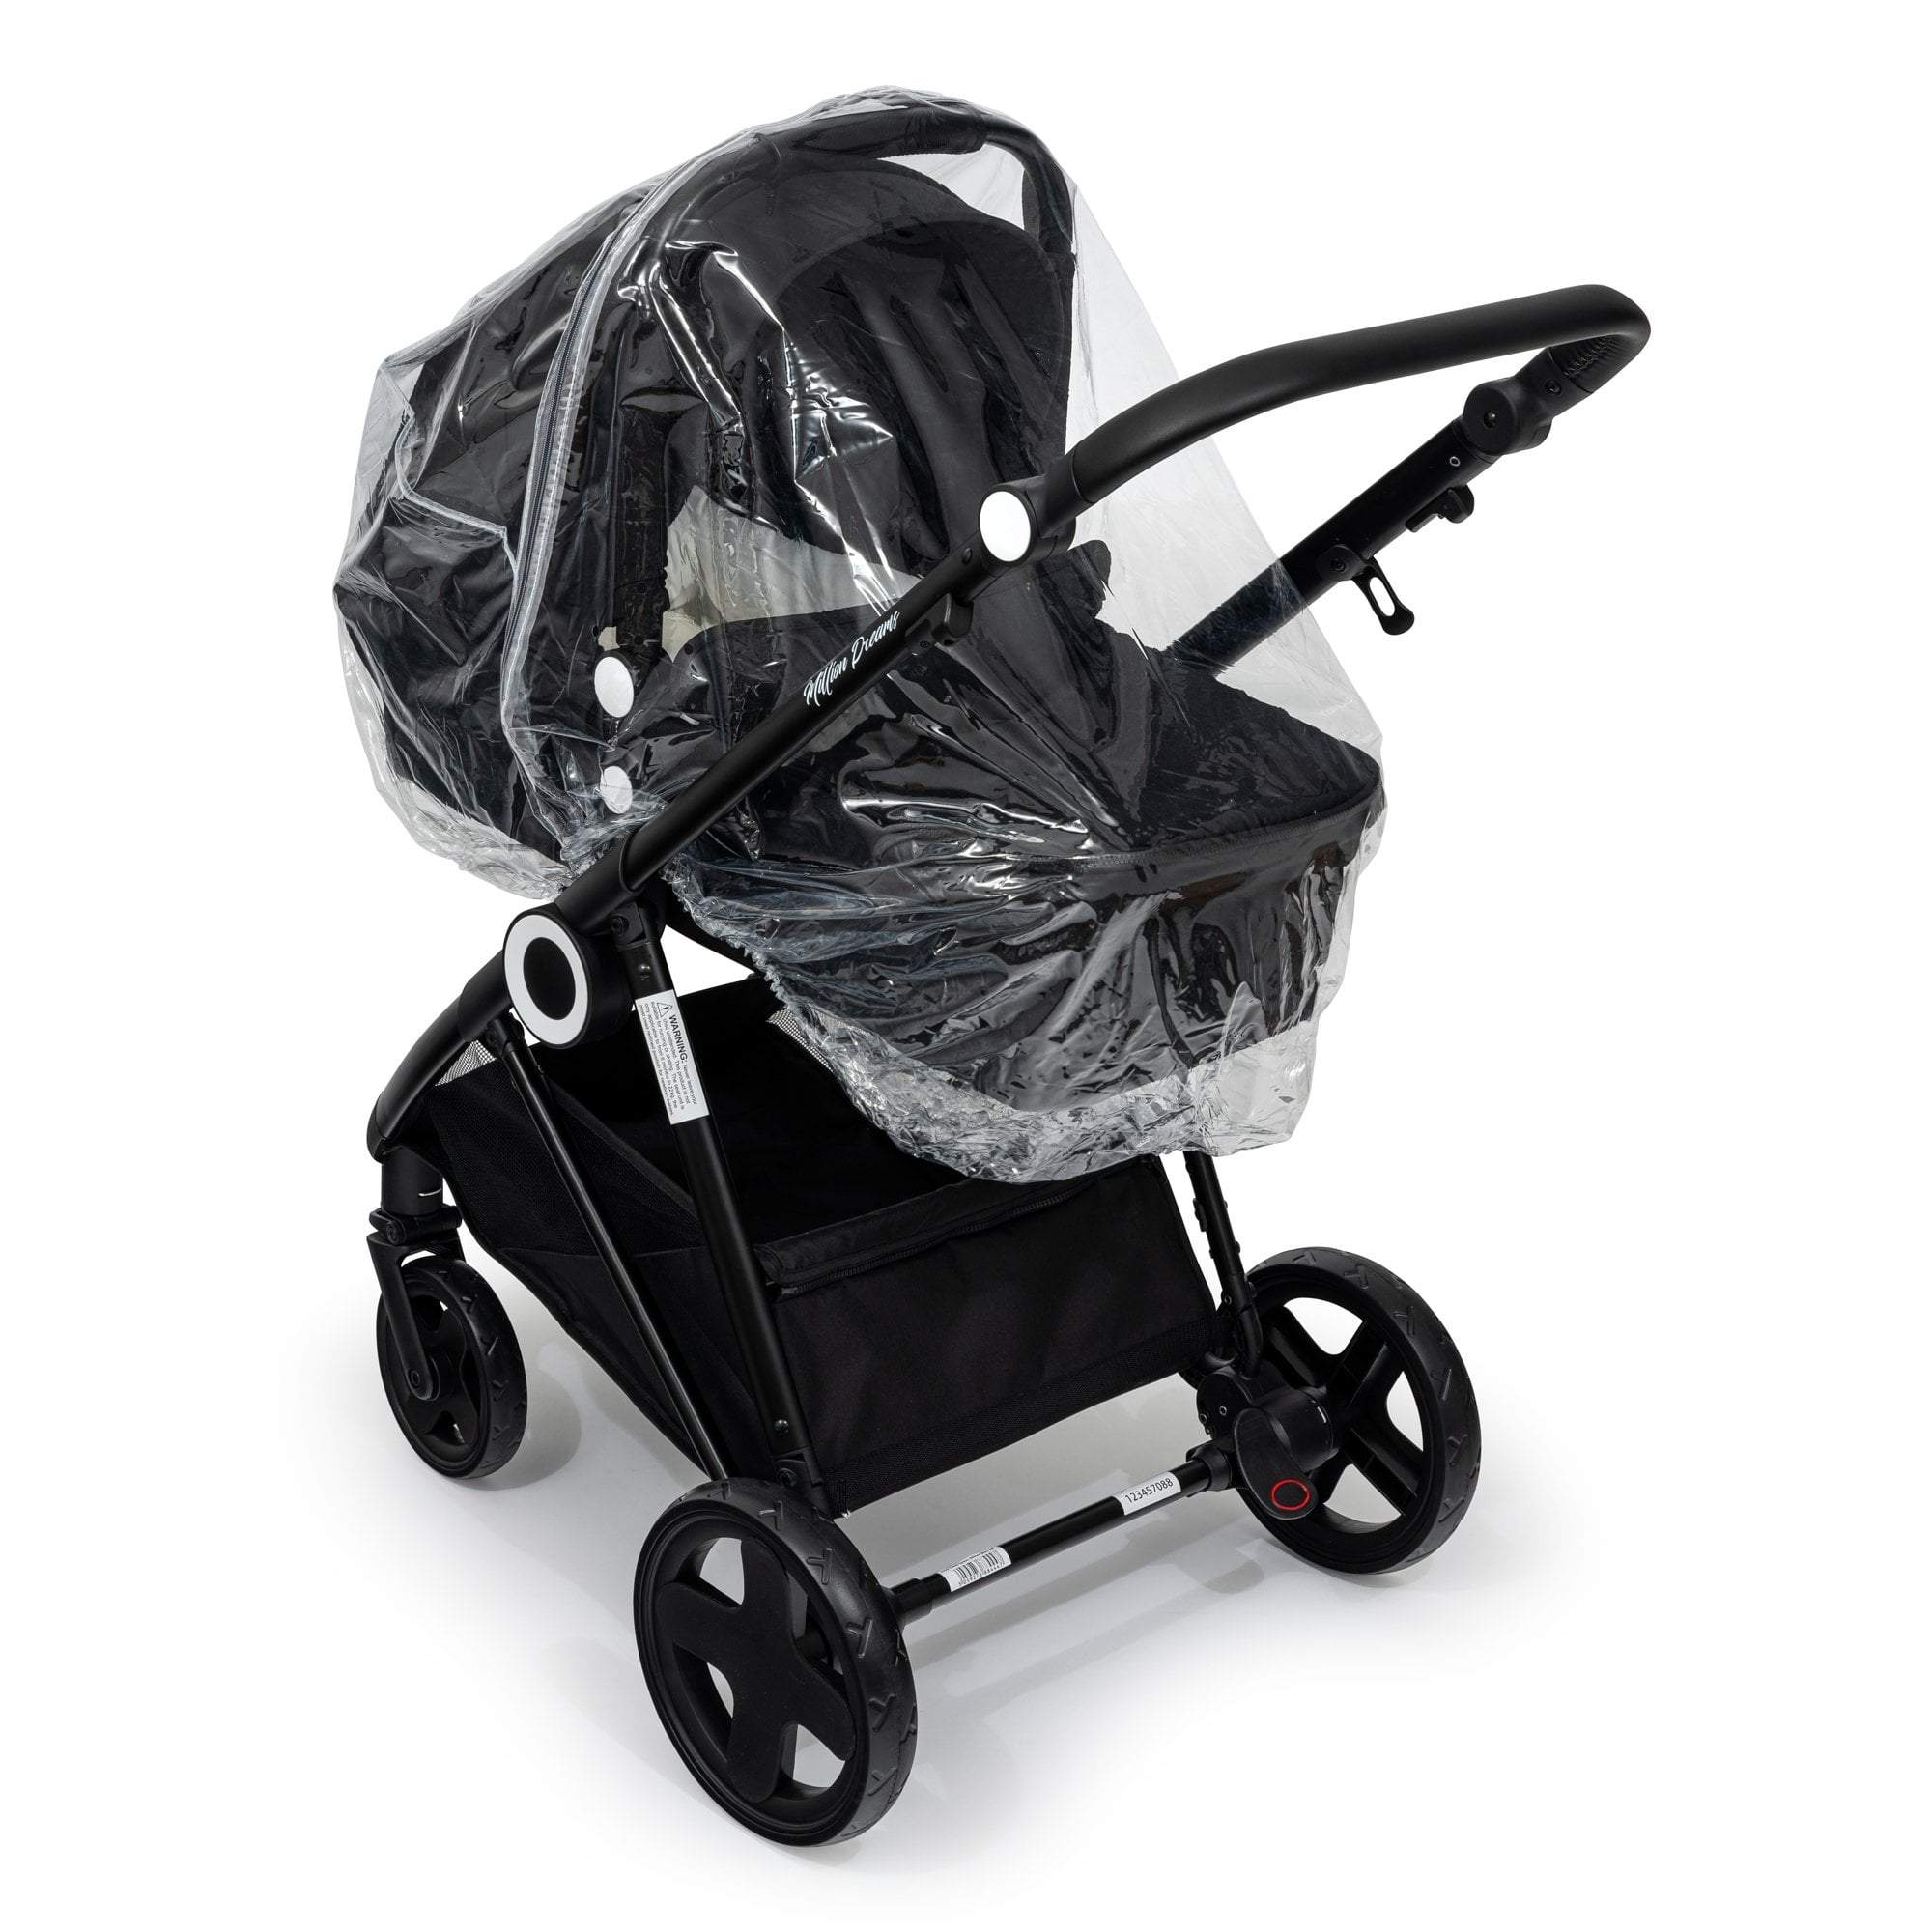 Carrycot Raincover Compatible with Peg Perego - Fits All Models - For Your Little One